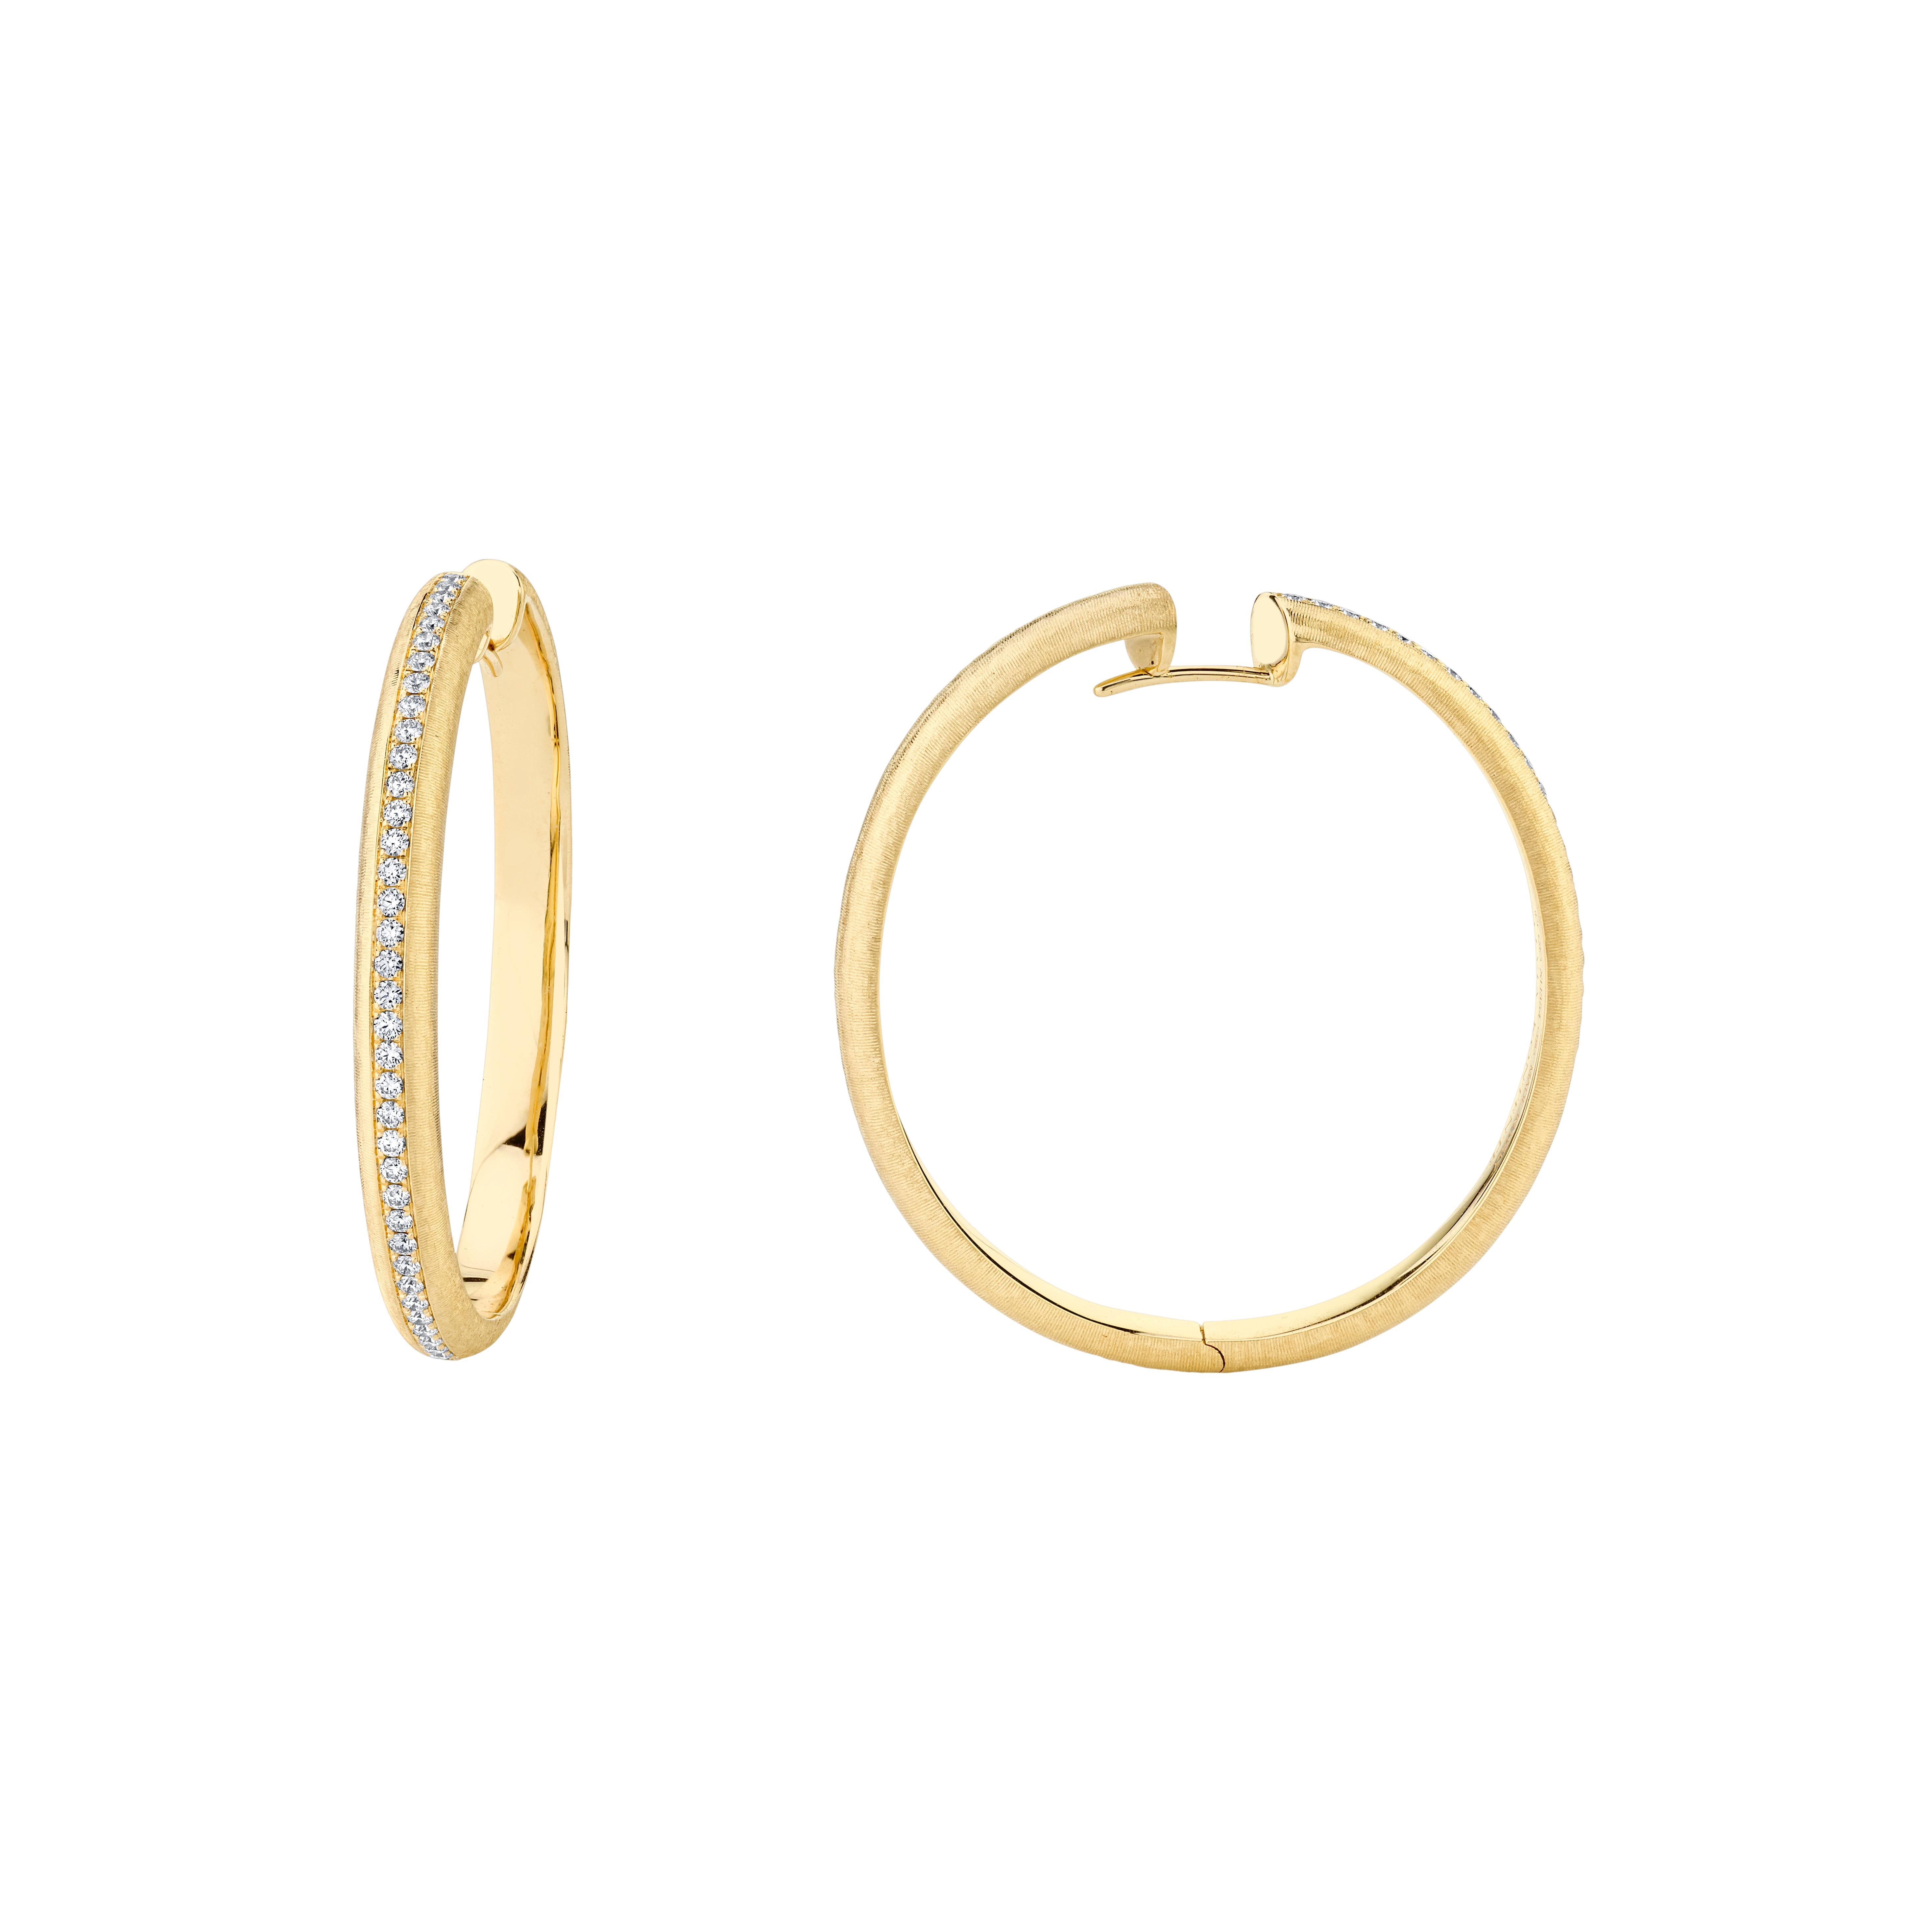 Style #: XH354E.
SYLVIA KONTENTE 18K Yellow gold diamond hoop earrings with hand-engraved finish.
Precision-cut, round brilliant diamonds.
Diamond total weight: 0.72ct tw.
Diamond color/clarity: DEF/VVS VS.
Hand-engraved finish - The ancient art of